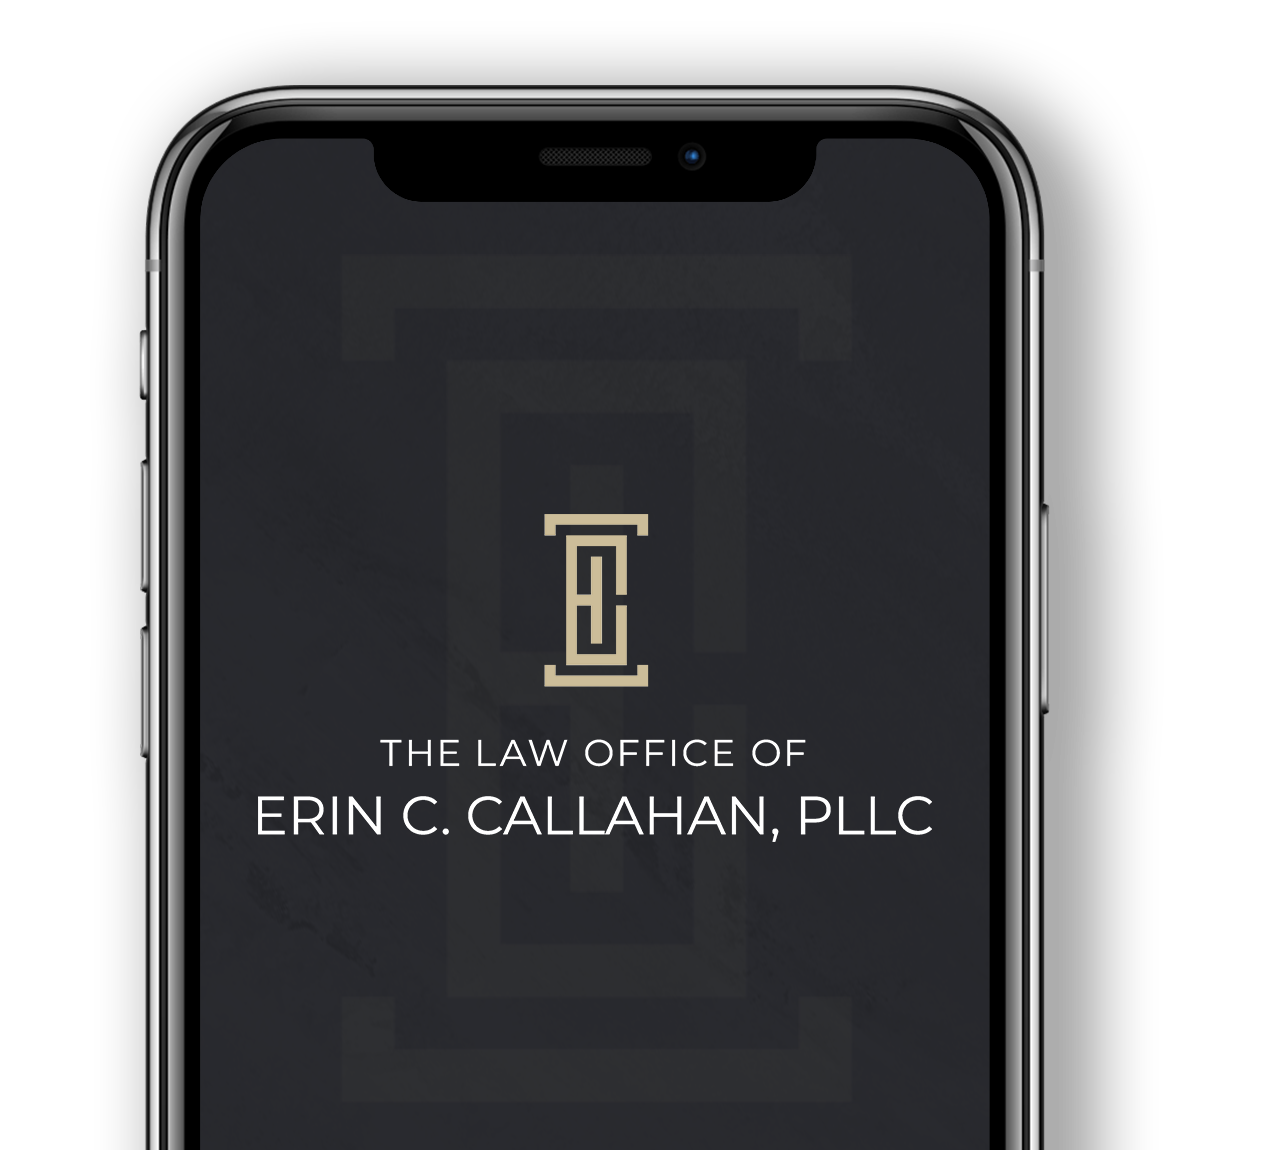 The Law Office of Erin C. Callahan, PLLC 